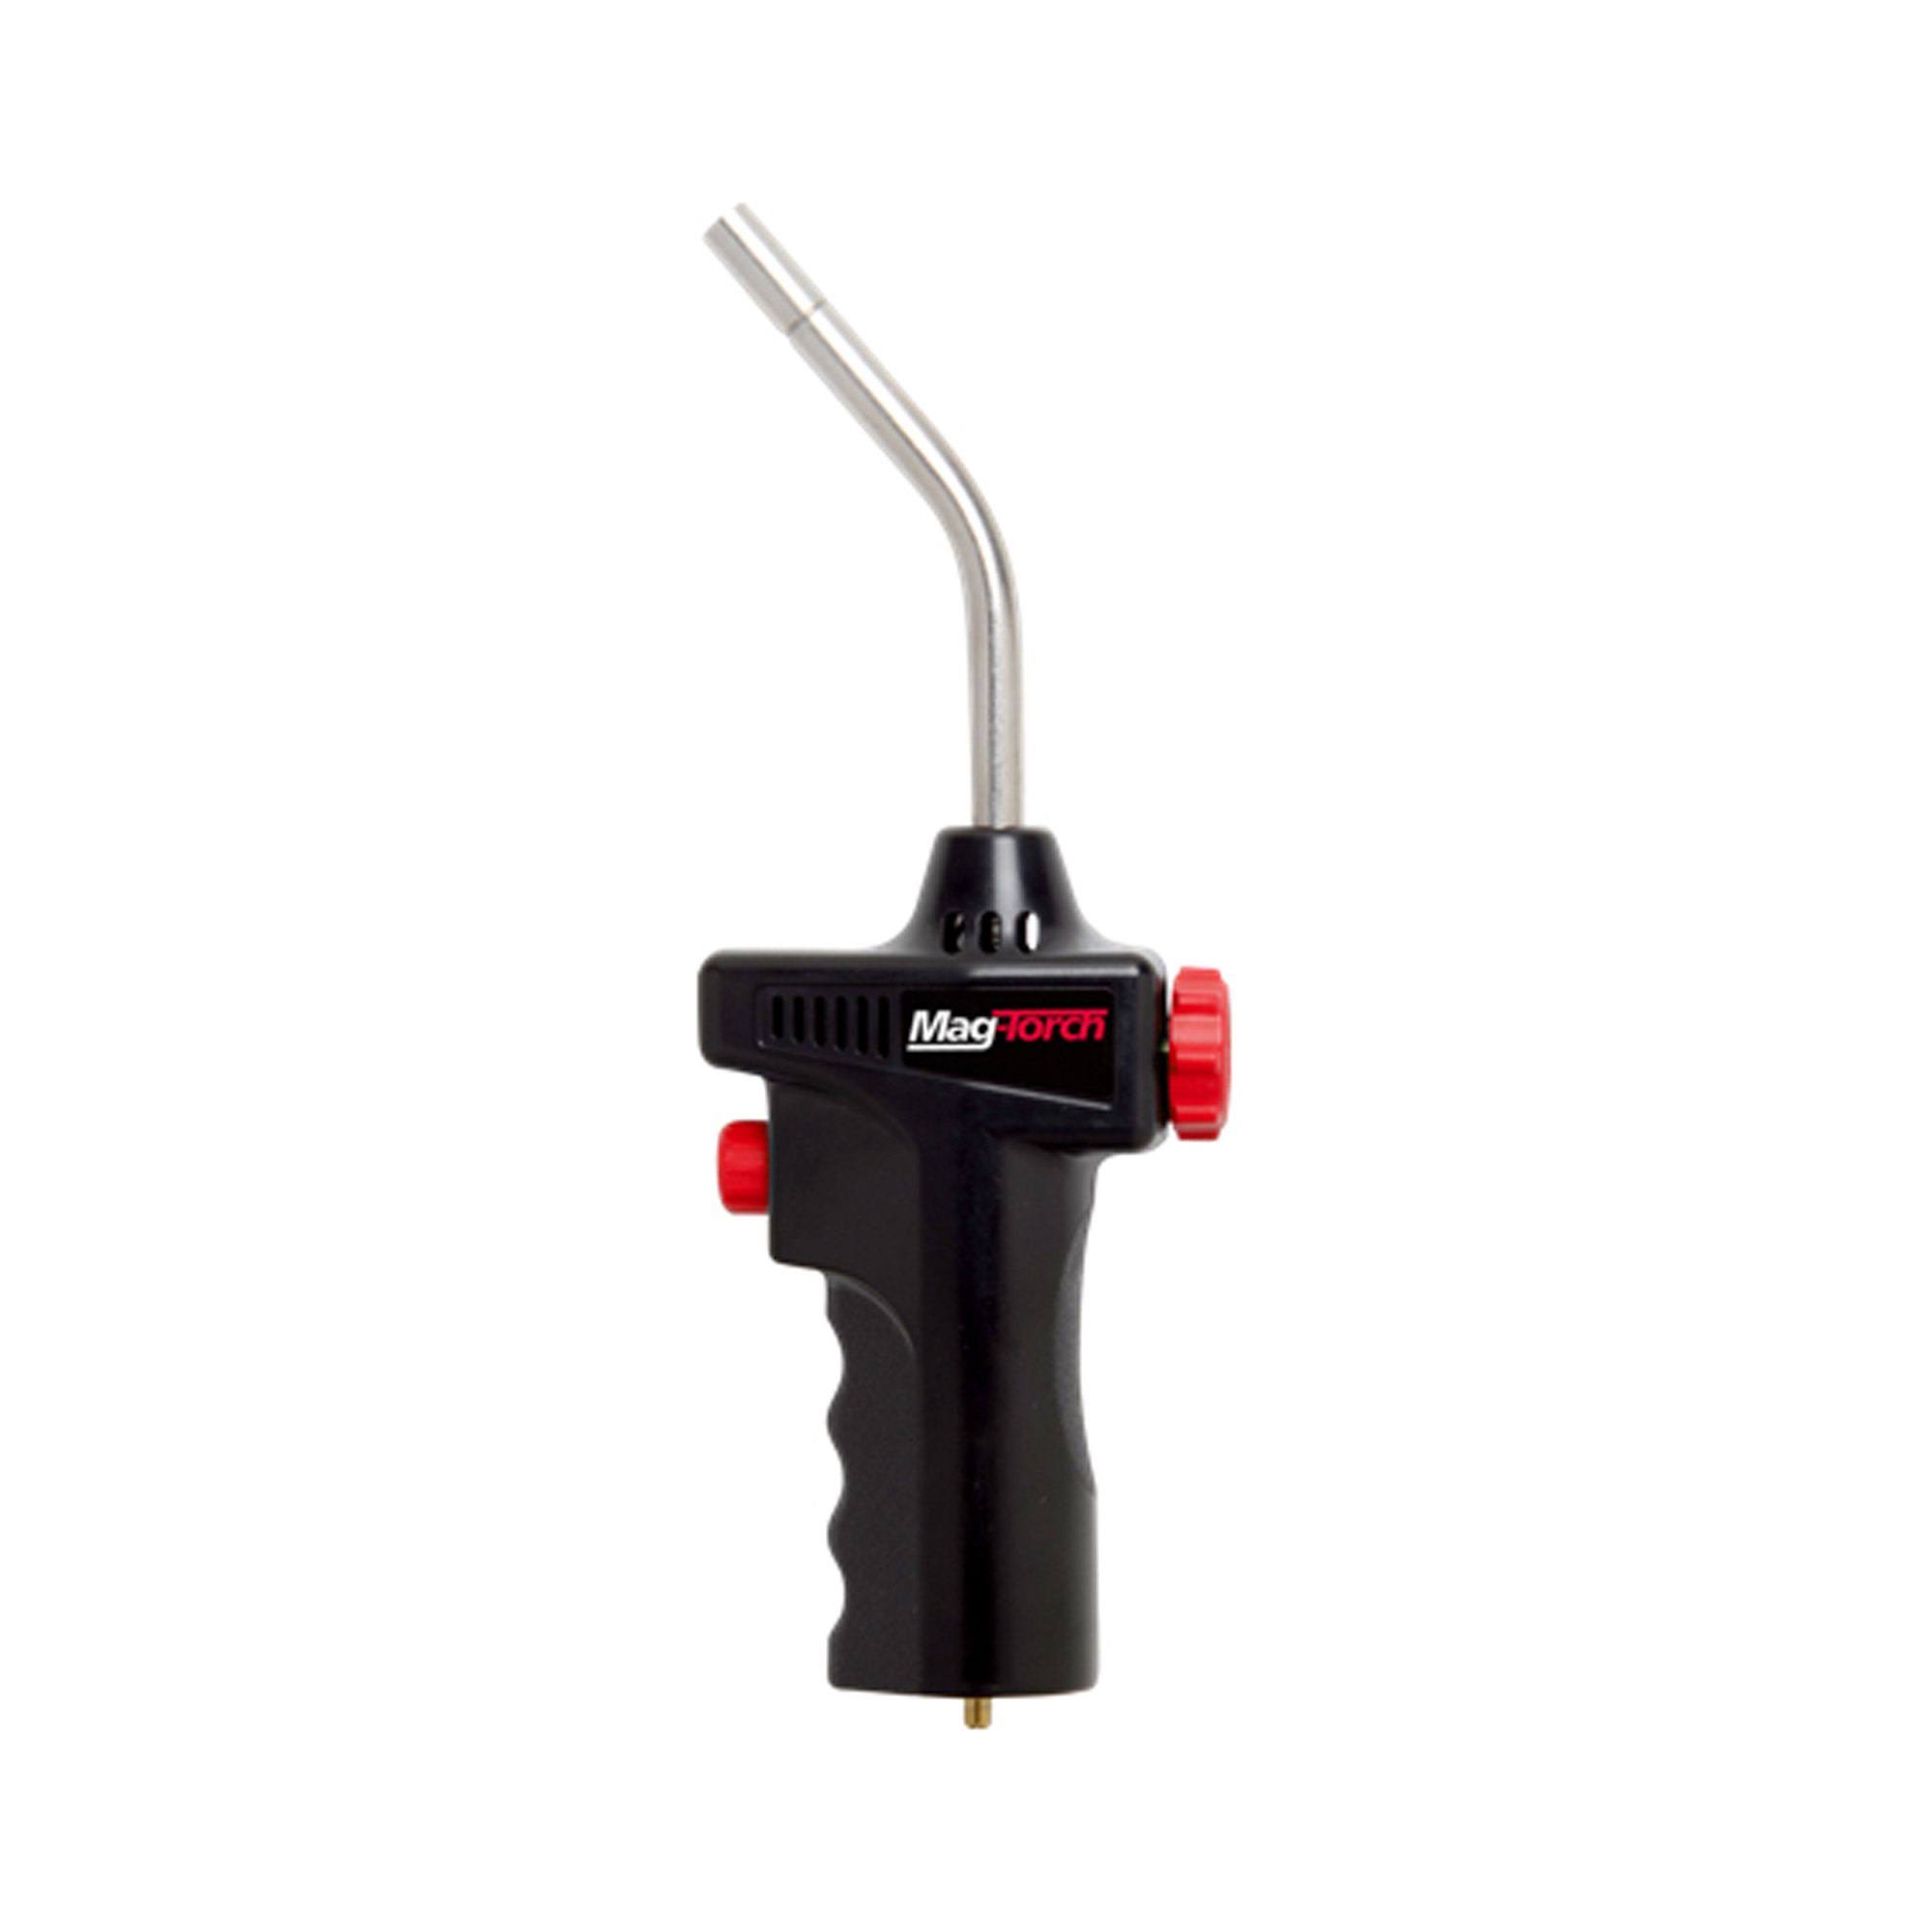 Mag-Torch Utility Torch